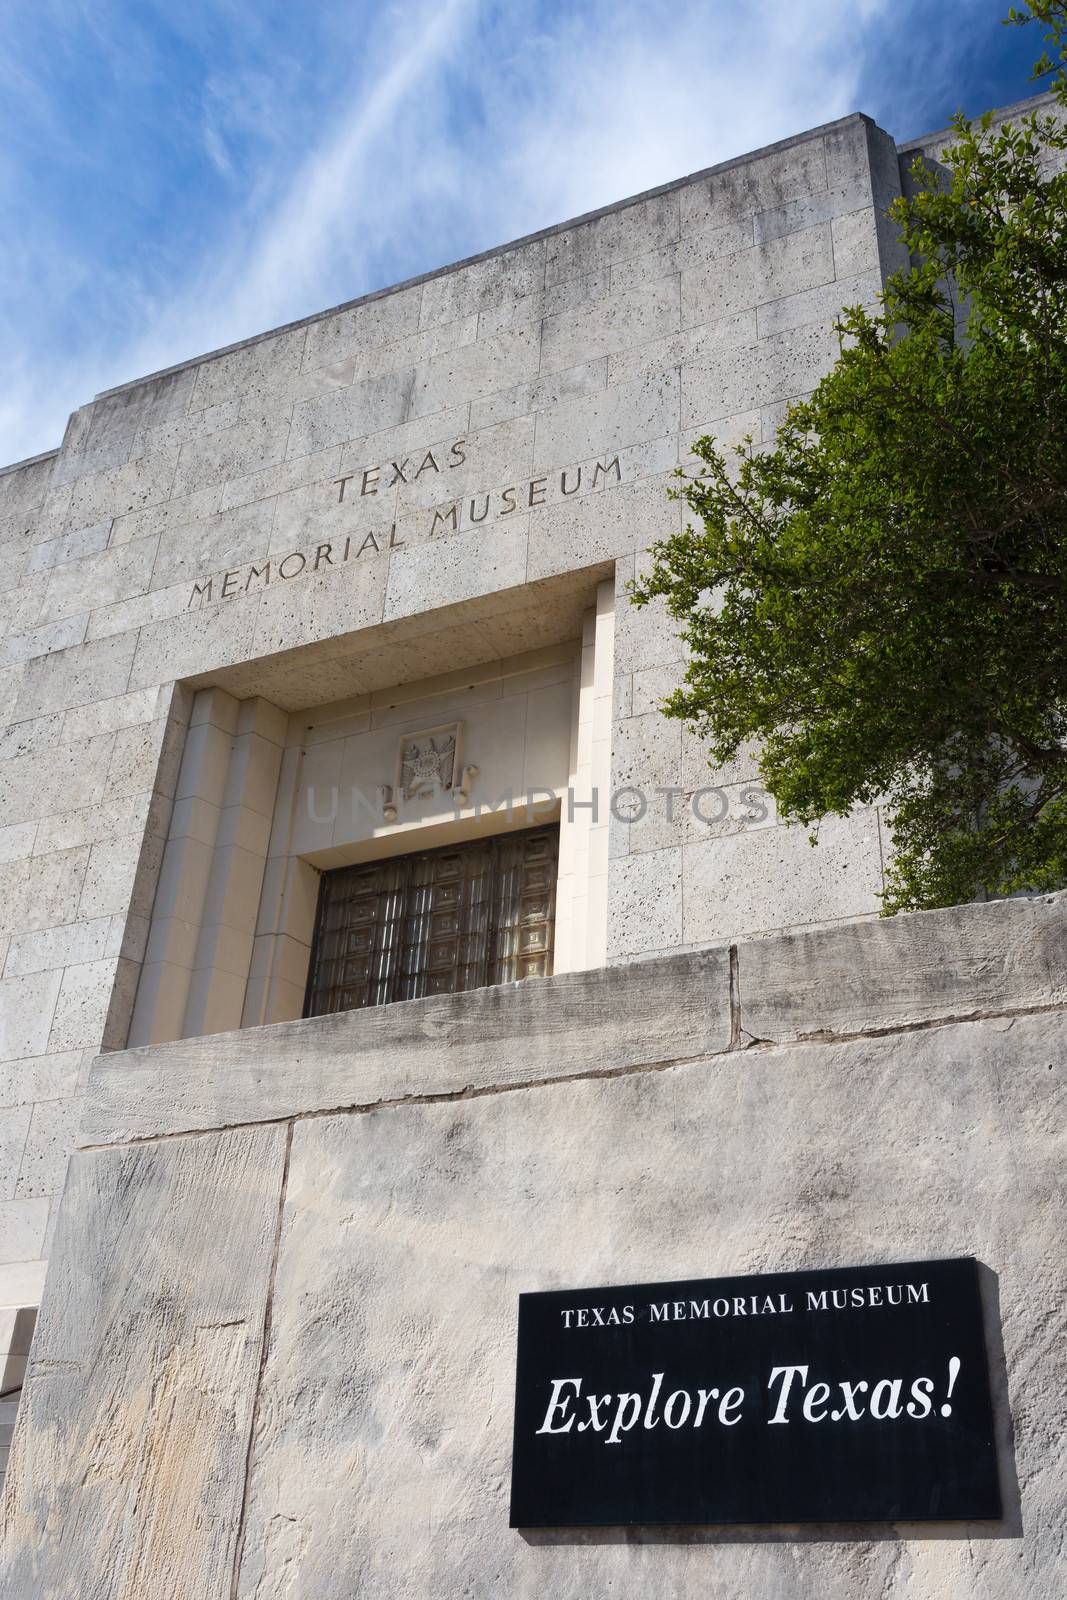 AUSTIN,TX/USA - NOVEMBER 14:  Texas Memorial Museum on the campus of the University of Texas, a state research university and the flagship institution of the The University of Texas System. November 14, 2013.